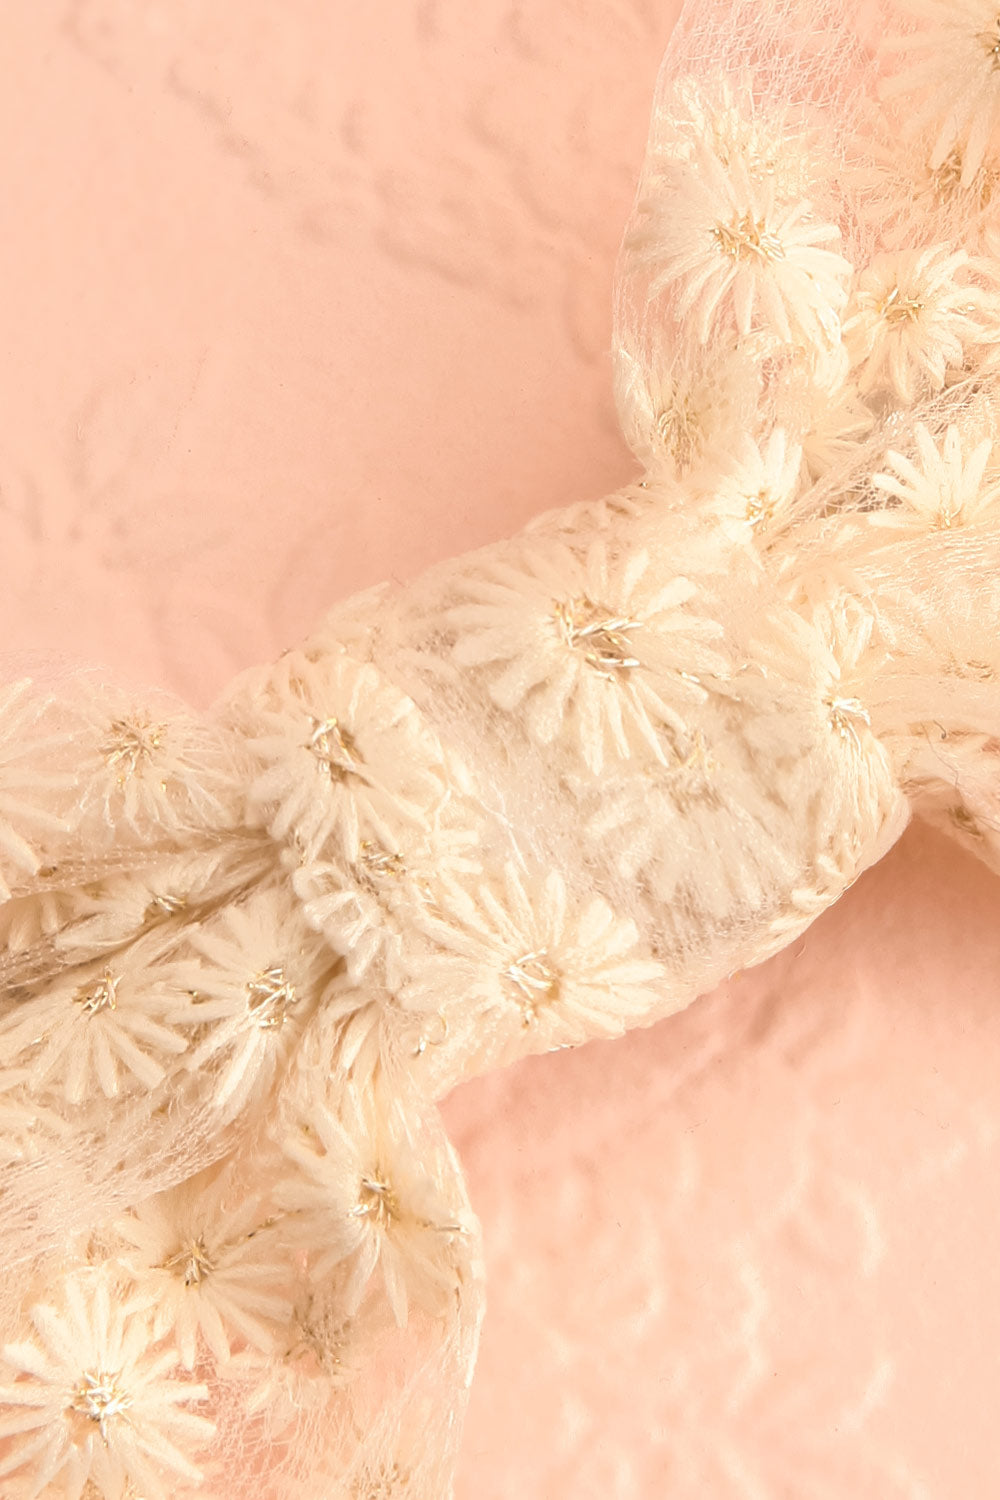 Paourat Oversized Daisy Bow Hair Clip | Boutique 1861 close-up